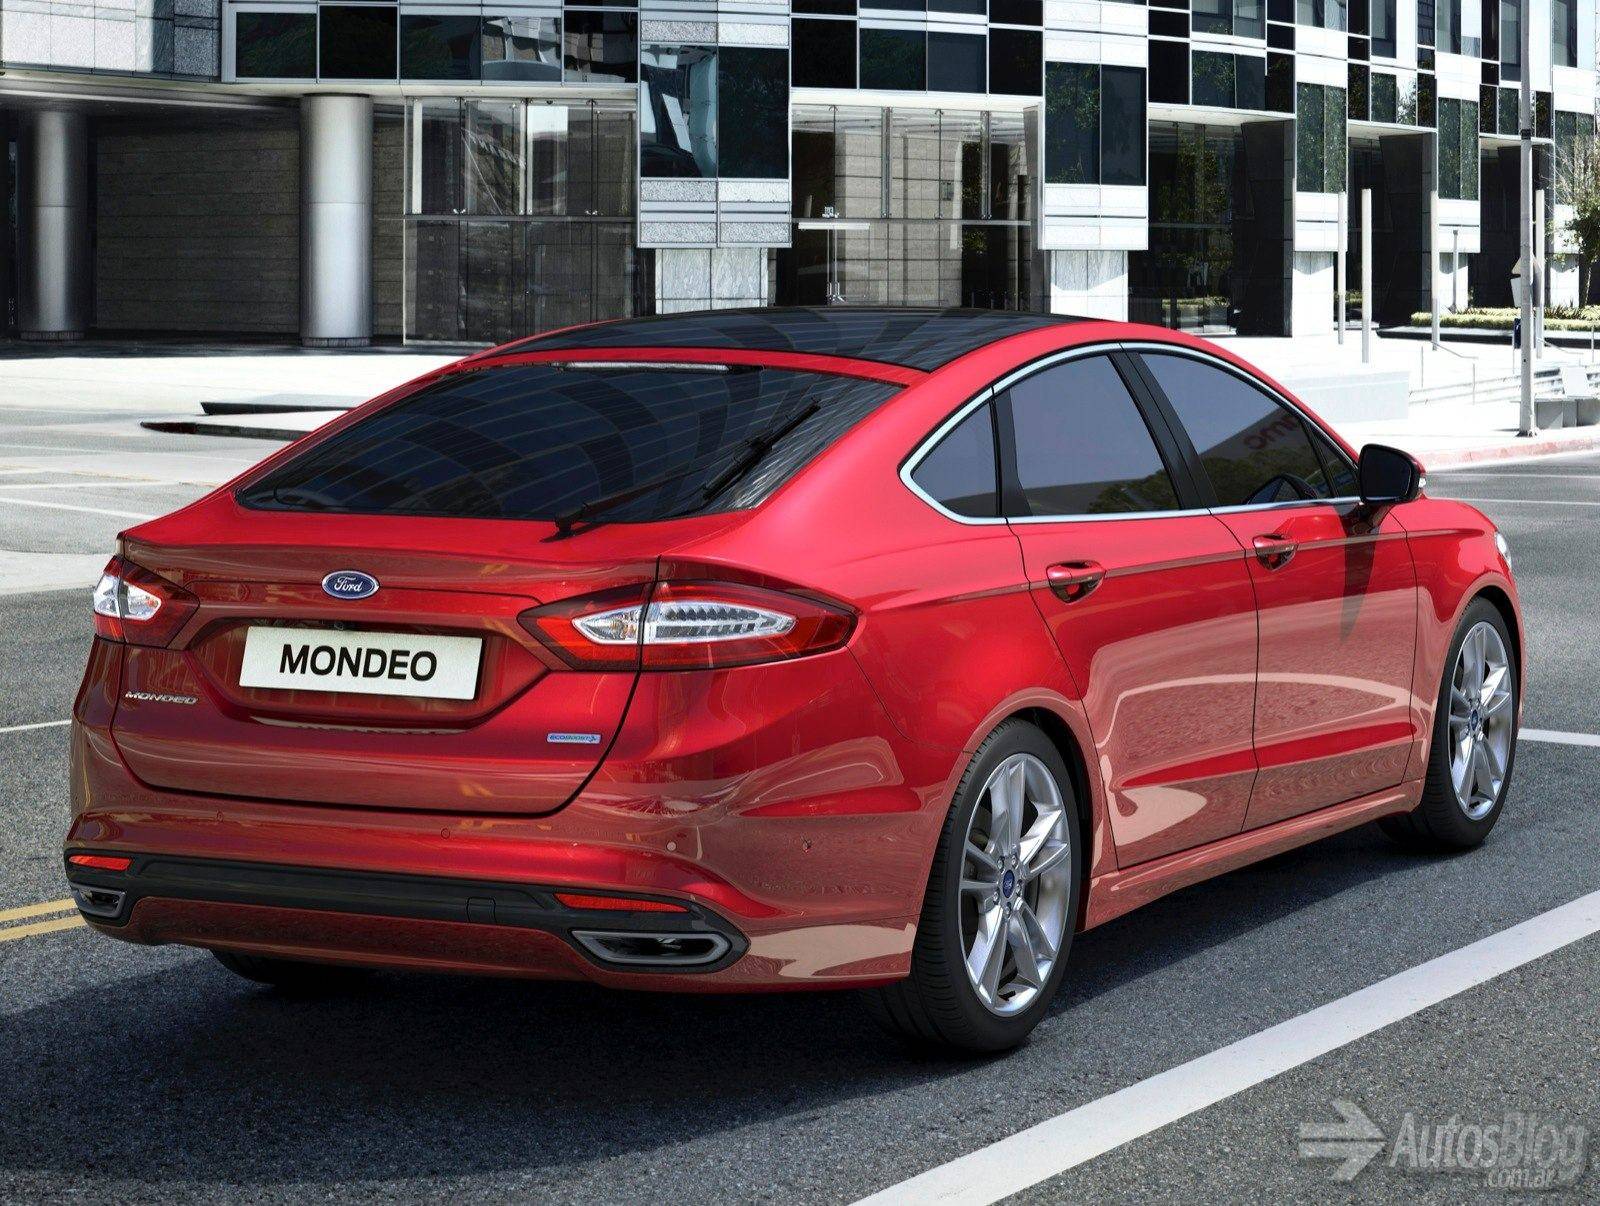 Mondeo ecoboost. Ford Mondeo 2015. Ford Fusion Mondeo 5. Форд Мондео 2015 года. Форд Фьюжн седан 2015.